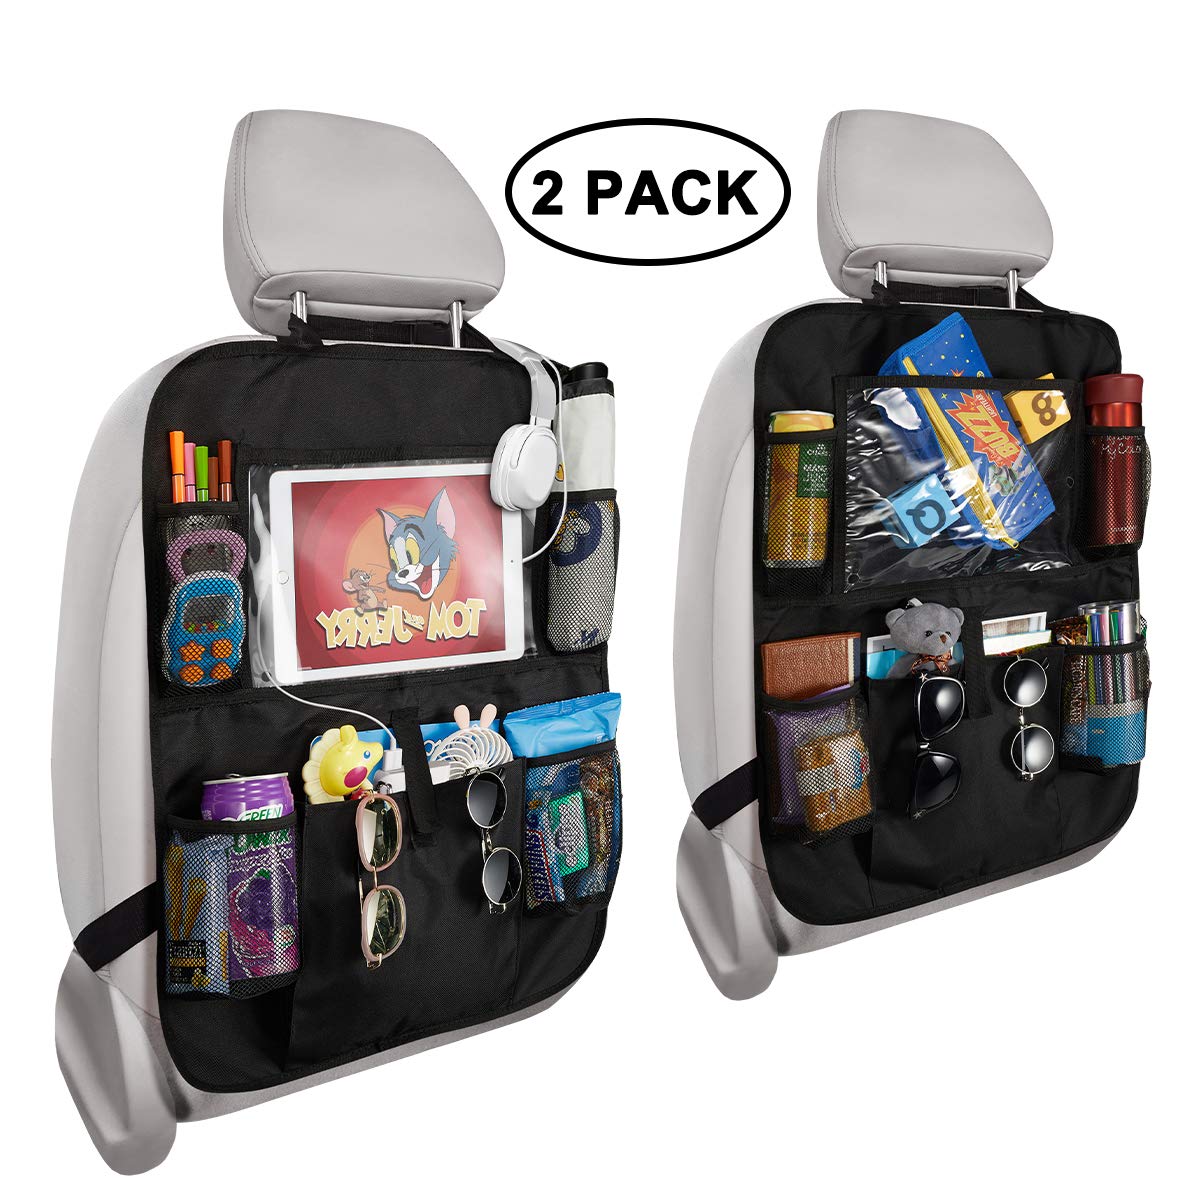 BicycleStore Backseat Car Organizer 2 Pack Extended Size Car Seat Protector Oxford Cloth Kids Back Seat Organizers Car Storage Kick Mats with 11 Tablet Holder Tissue Box for Toy Travel Accessories 